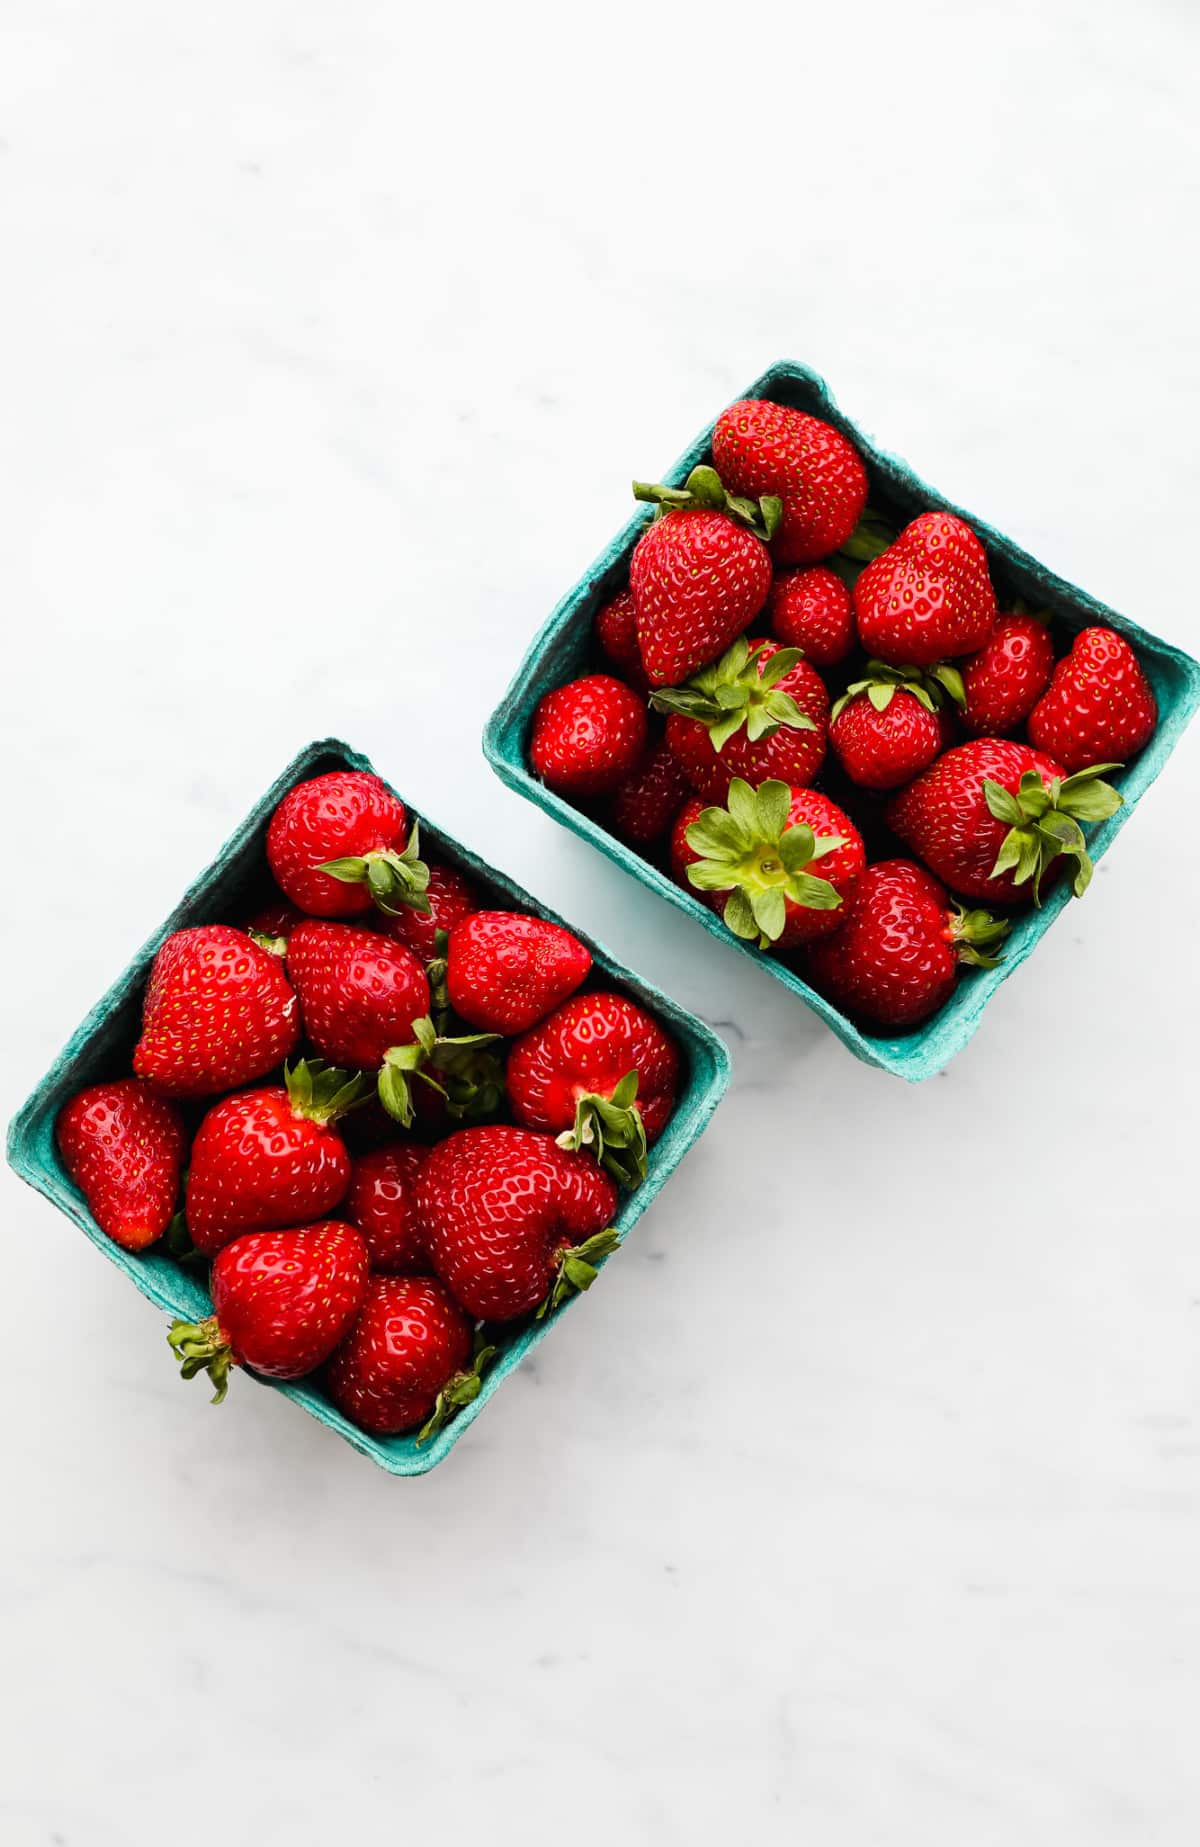 2 blue baskets filled with fresh strawberries.